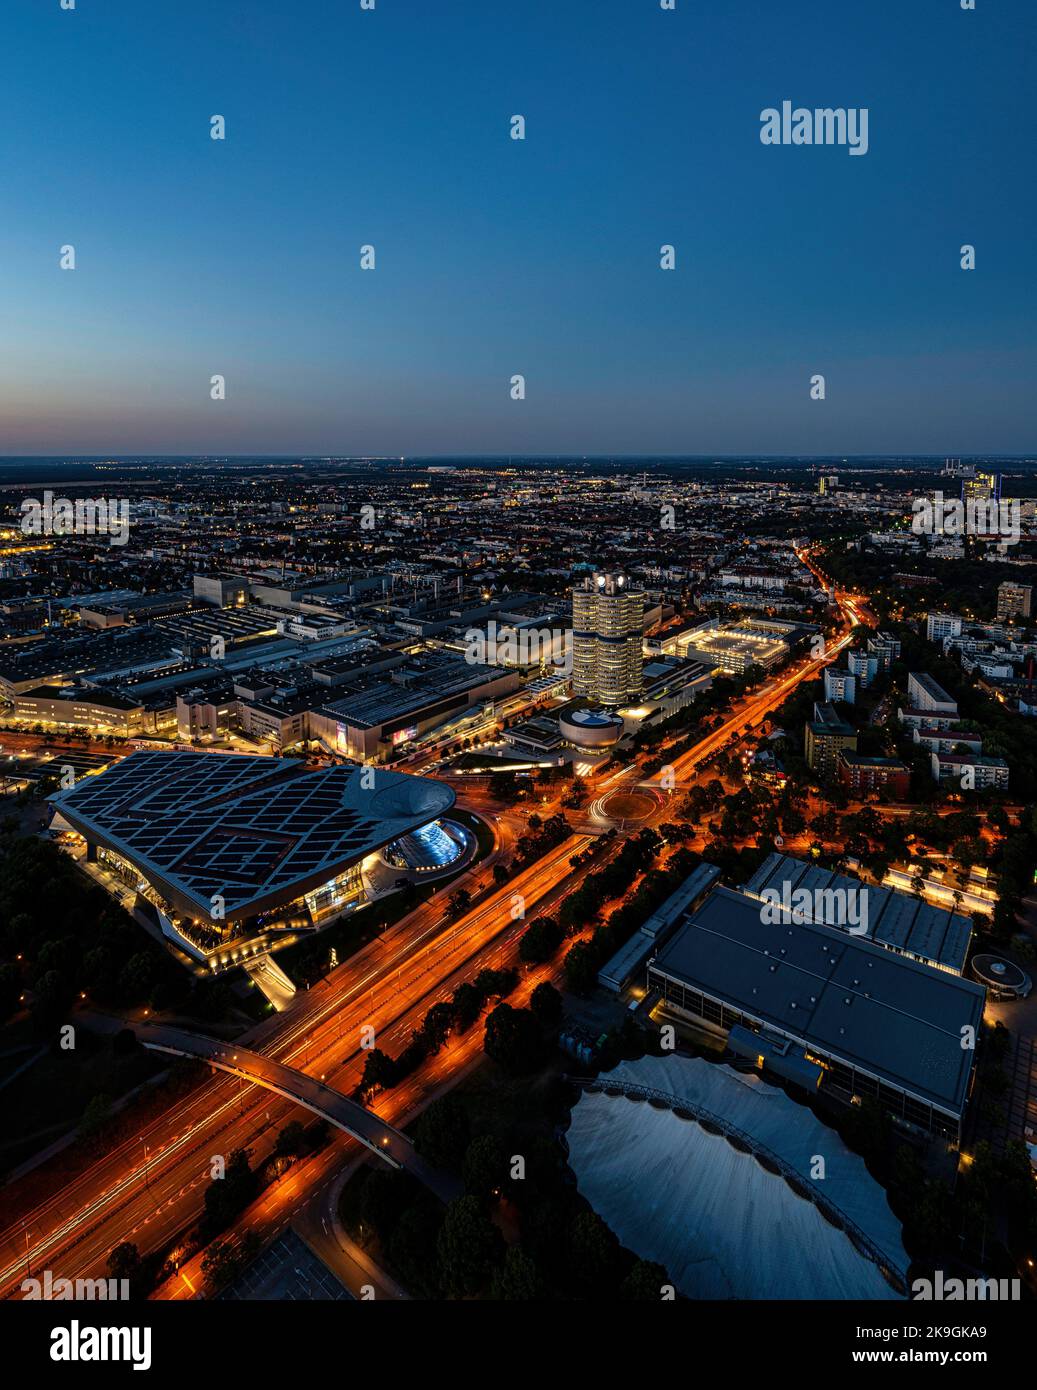 An aerial view of BMW headquarters in Munich, Germany at dusk Stock Photo